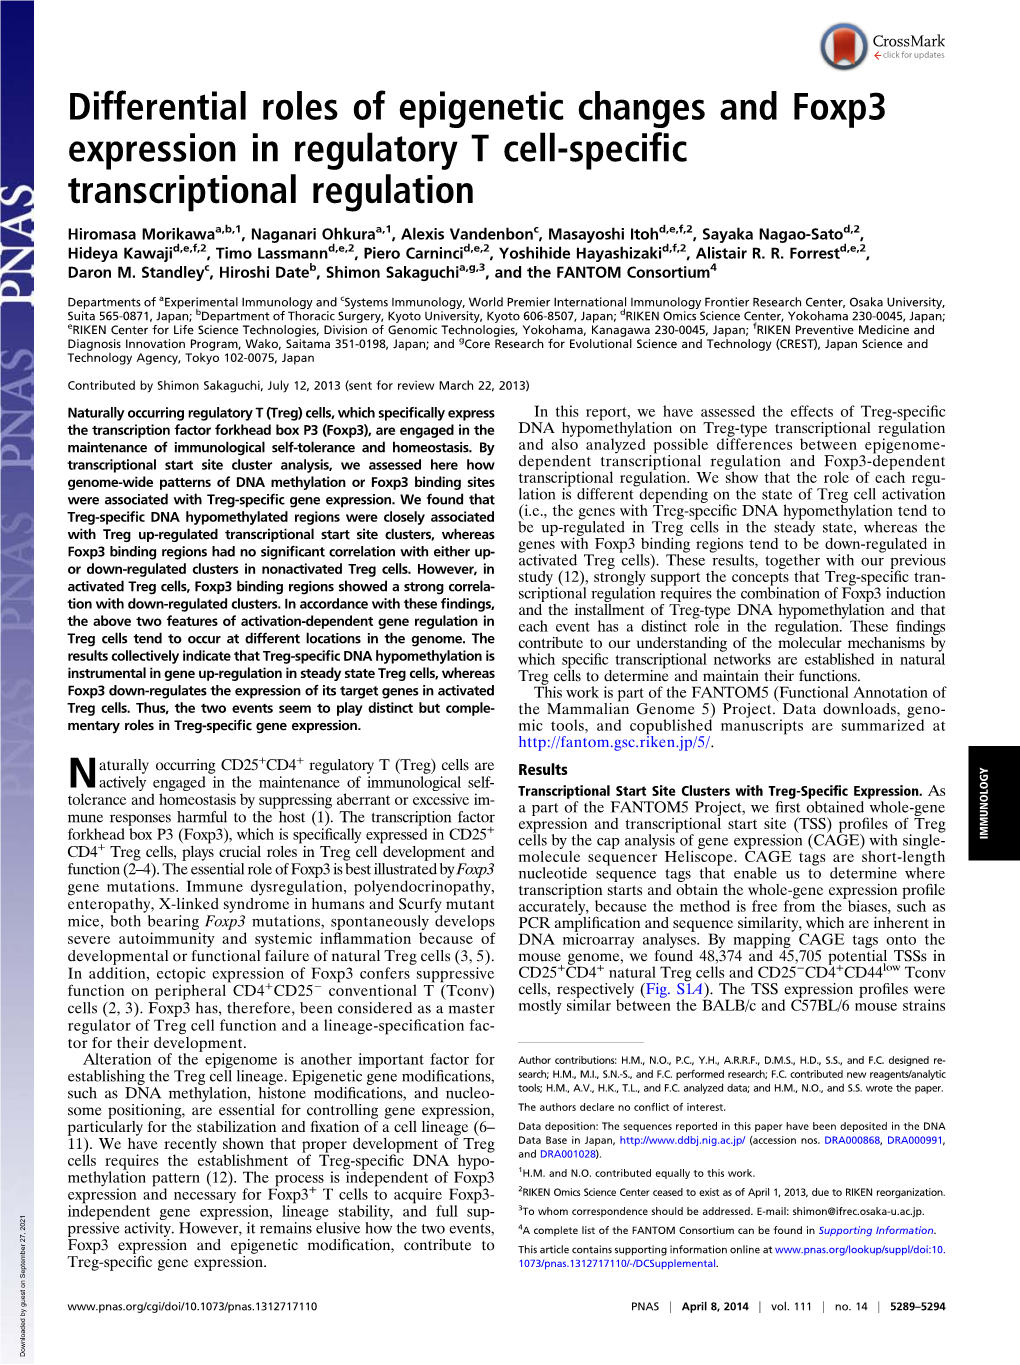 Differential Roles of Epigenetic Changes and Foxp3 Expression in Regulatory T Cell-Speciﬁc Transcriptional Regulation